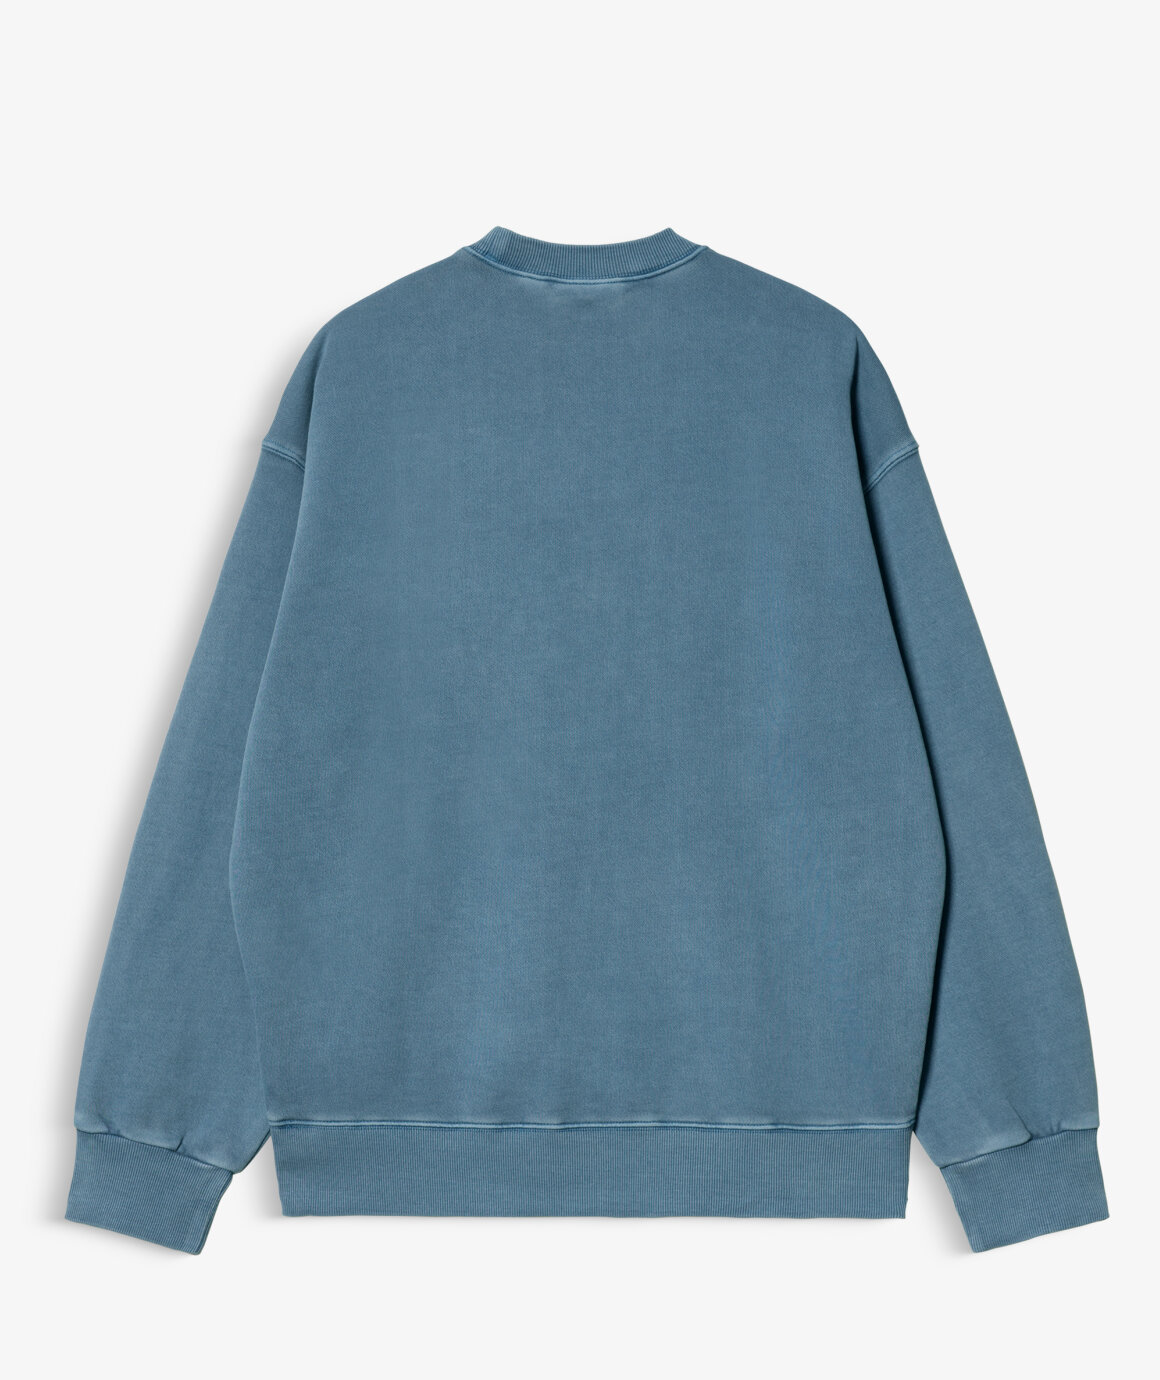 Norse Store | Shipping Worldwide - Carhartt Nelson Sweat - Icy Water